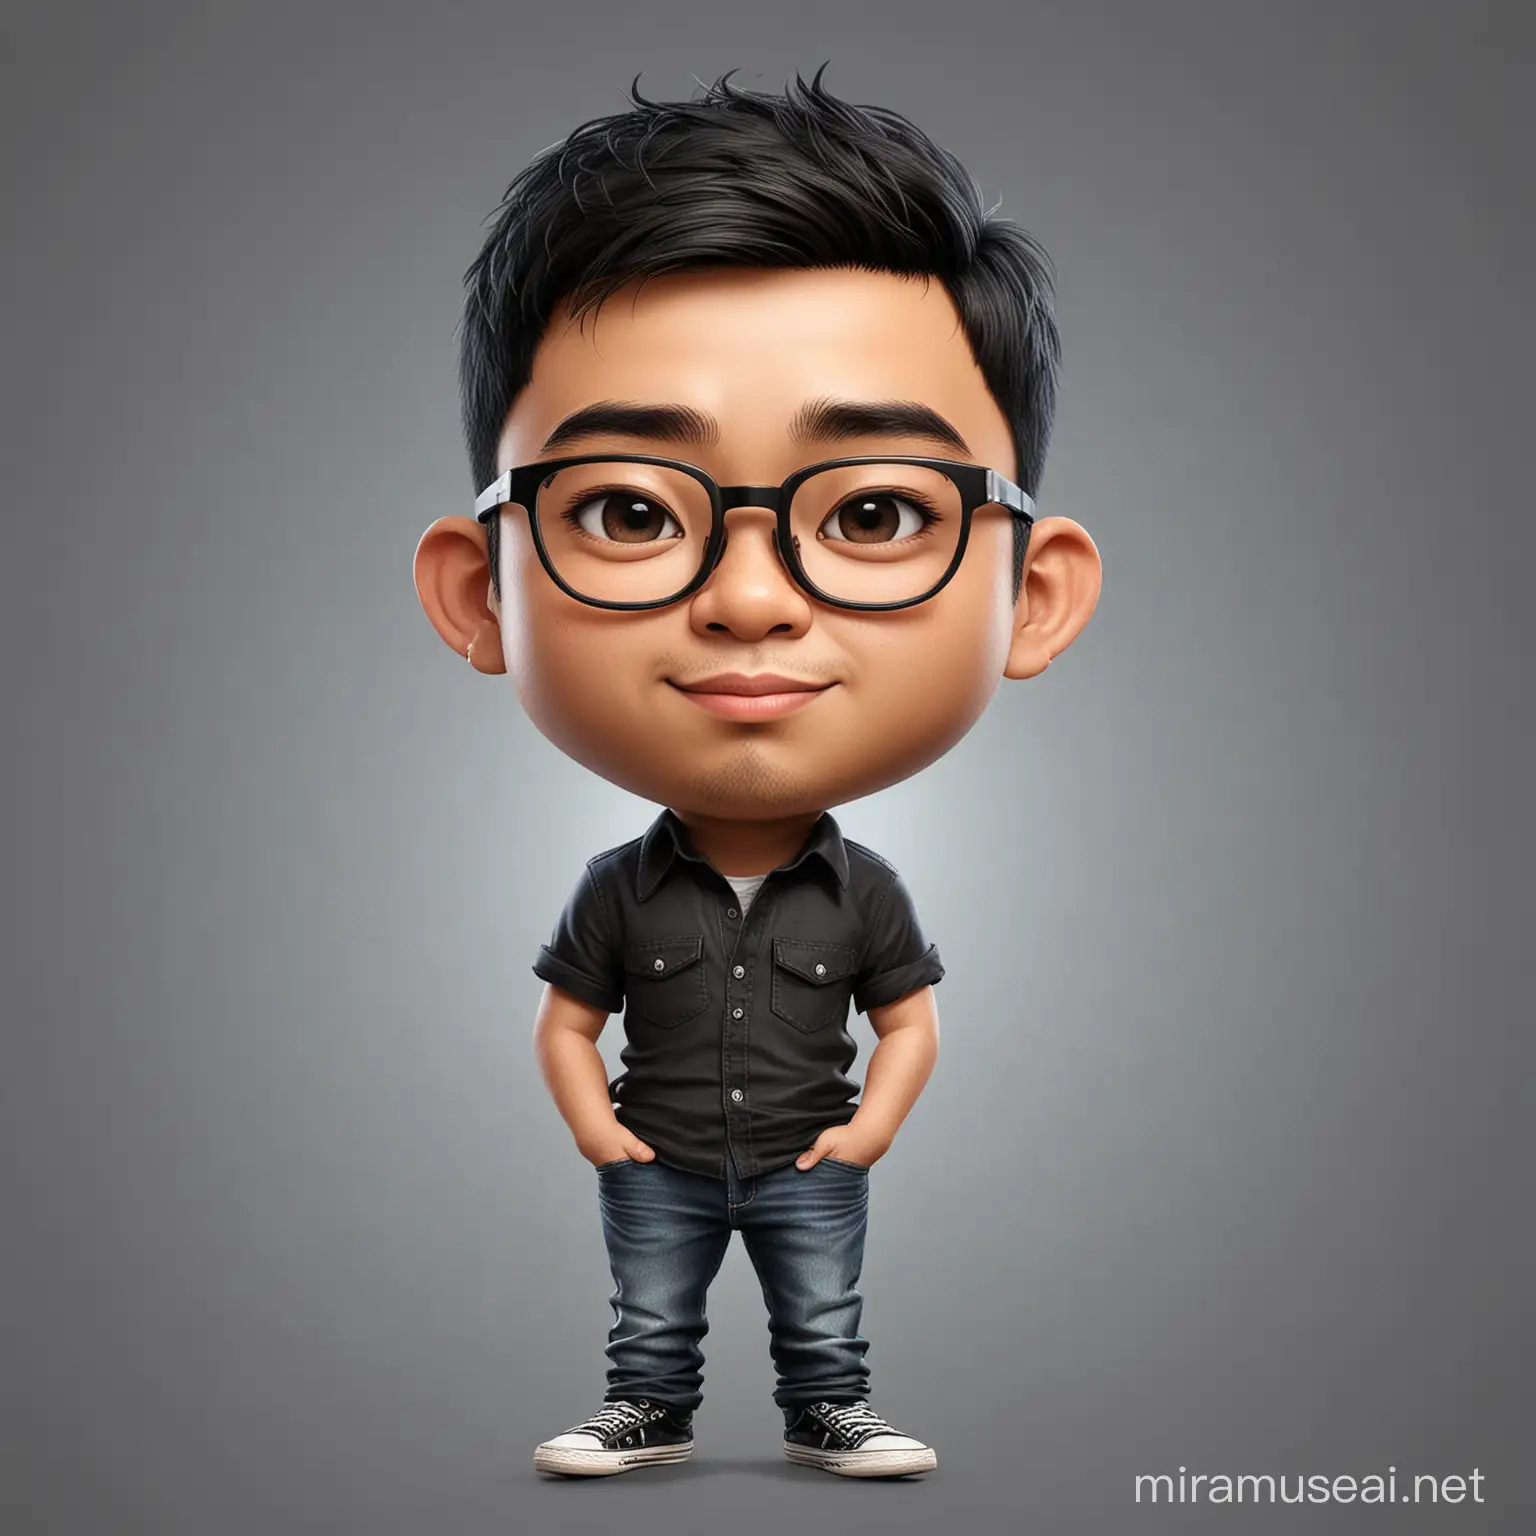 Chibi Caricature Portrait of a Stylish Indonesian Man in Black Shirt and Denim Pants